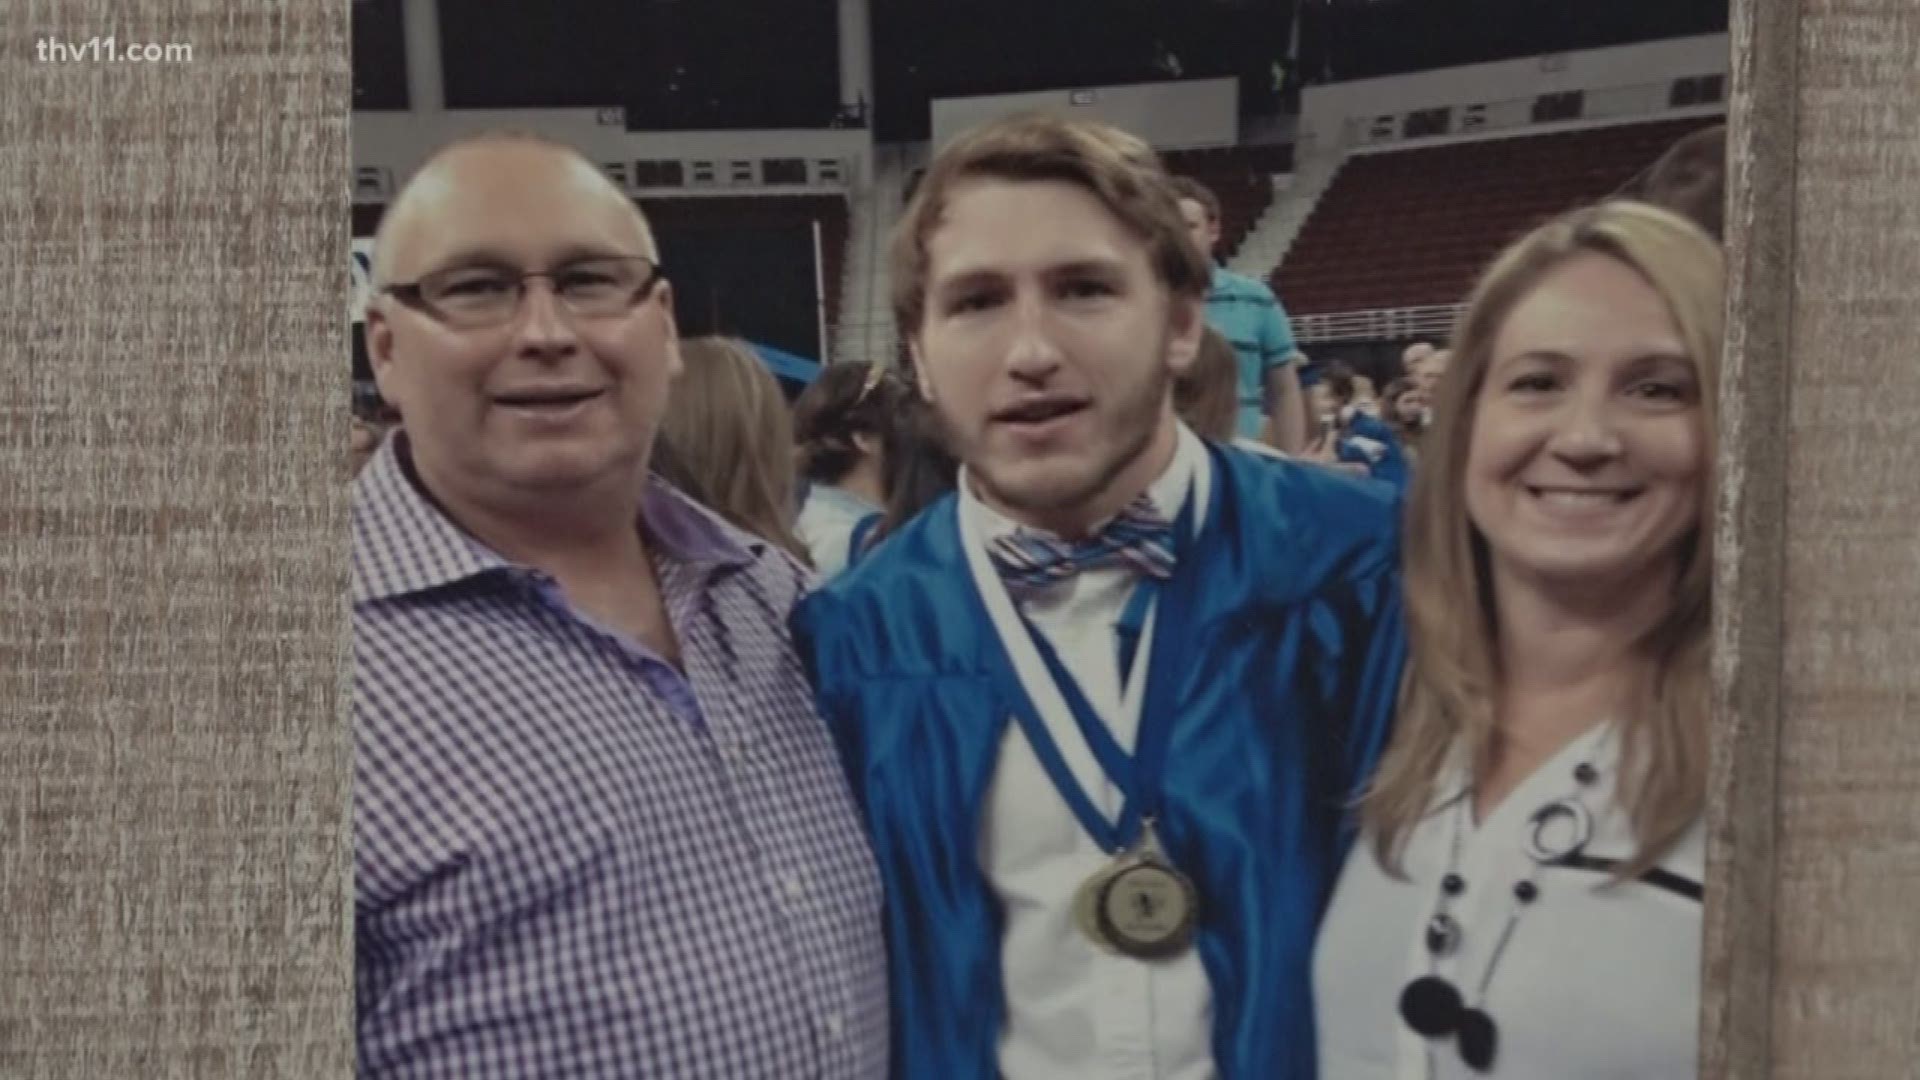 A Bryant family is still trying to heal after their 23-year-old son, brother, and grandson passed away from a drug overdose.